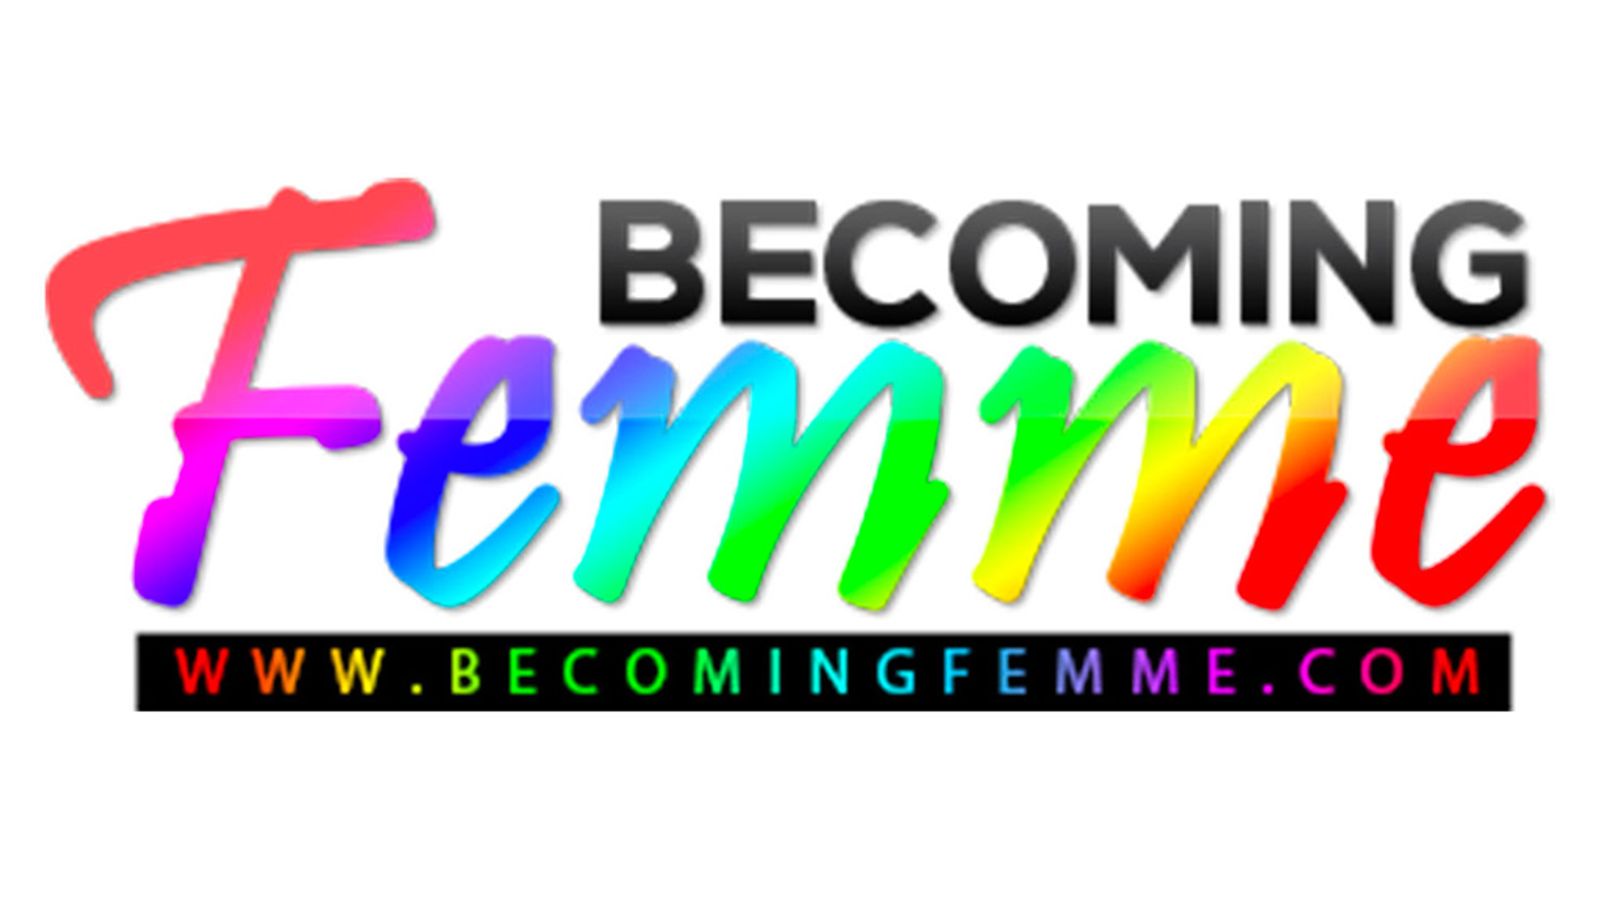 BecomingFemme.com Offers A Hardcore Look At Crossdressing